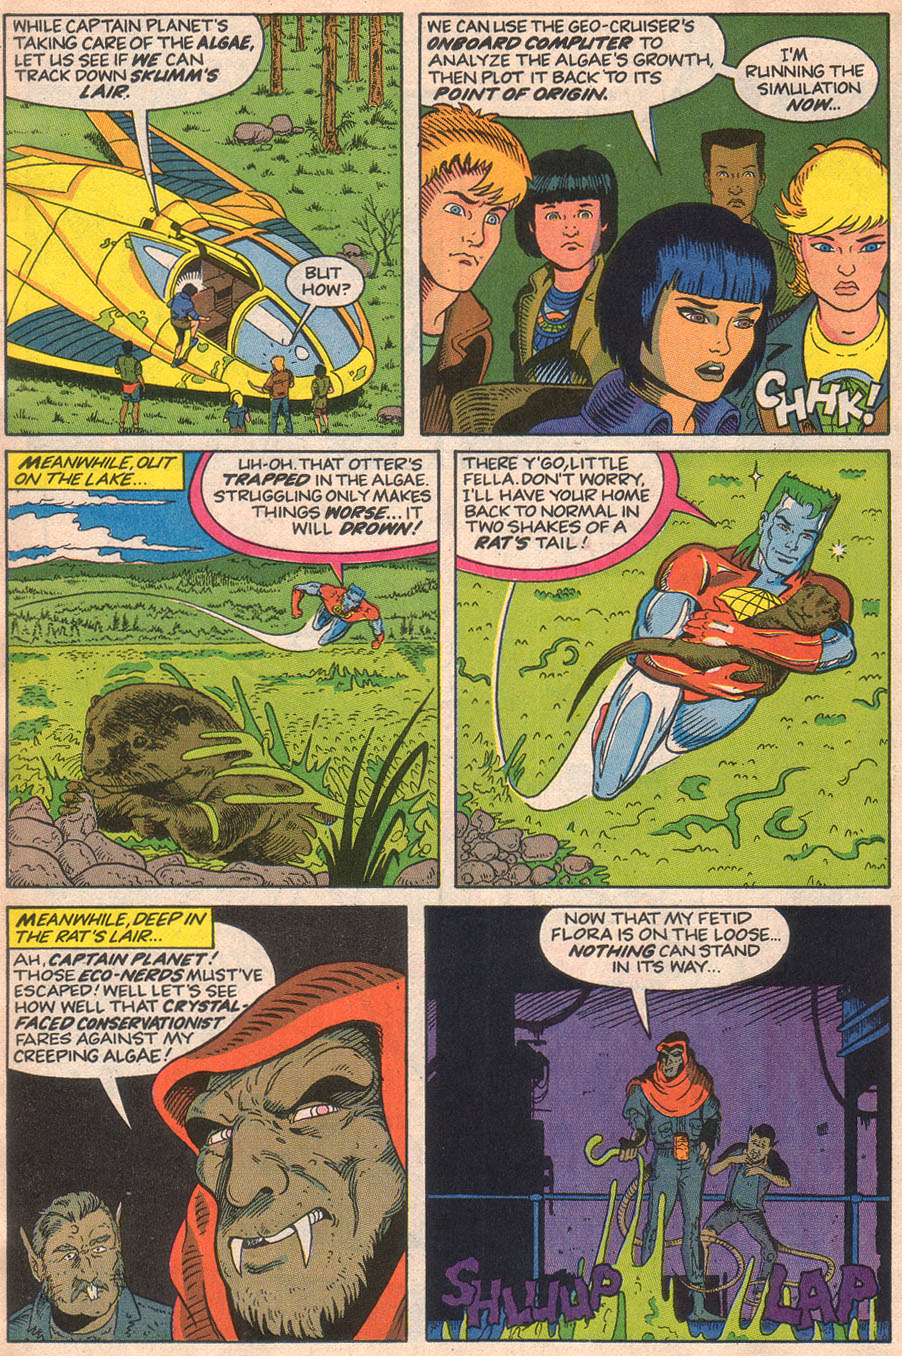 Captain Planet and the Planeteers 6 Page 15